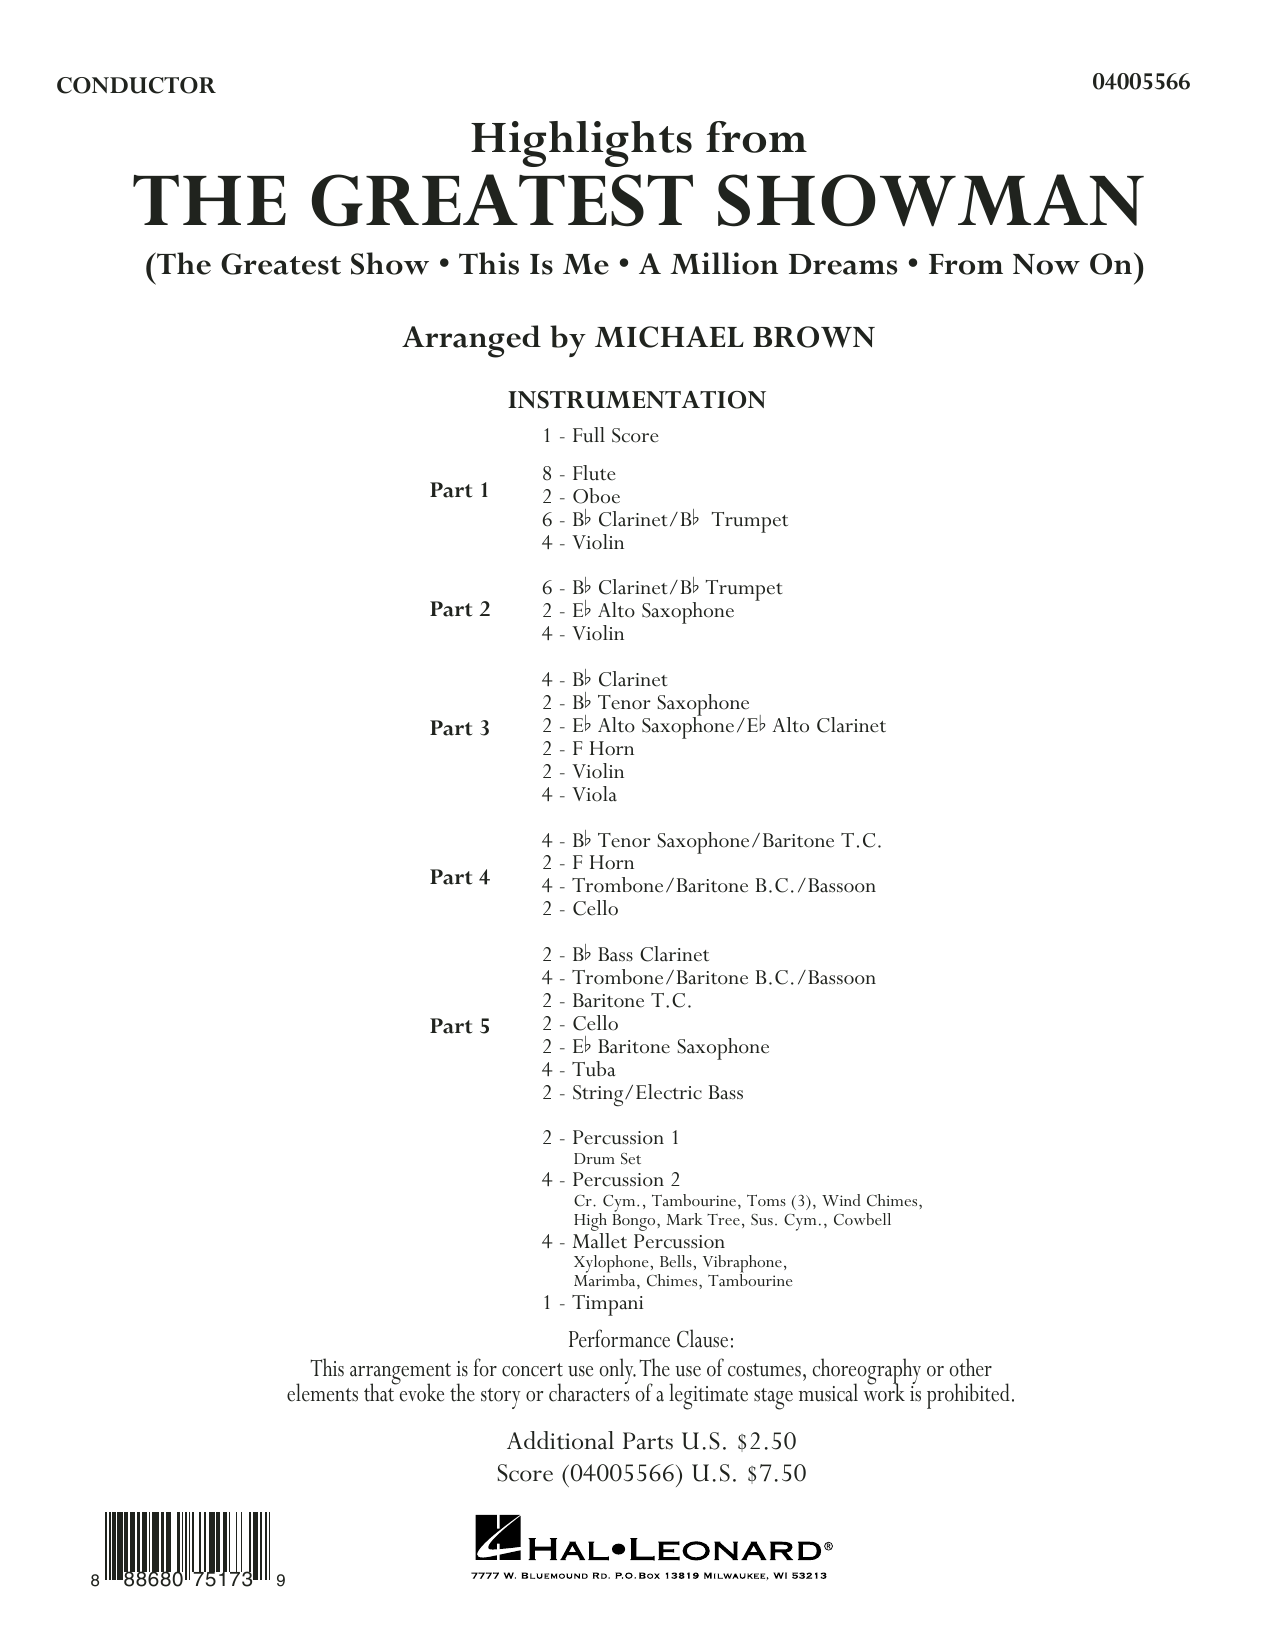 Michael Brown Highlights from The Greatest Showman - Conductor Score (Full Score) sheet music preview music notes and score for Concert Band including 31 page(s)